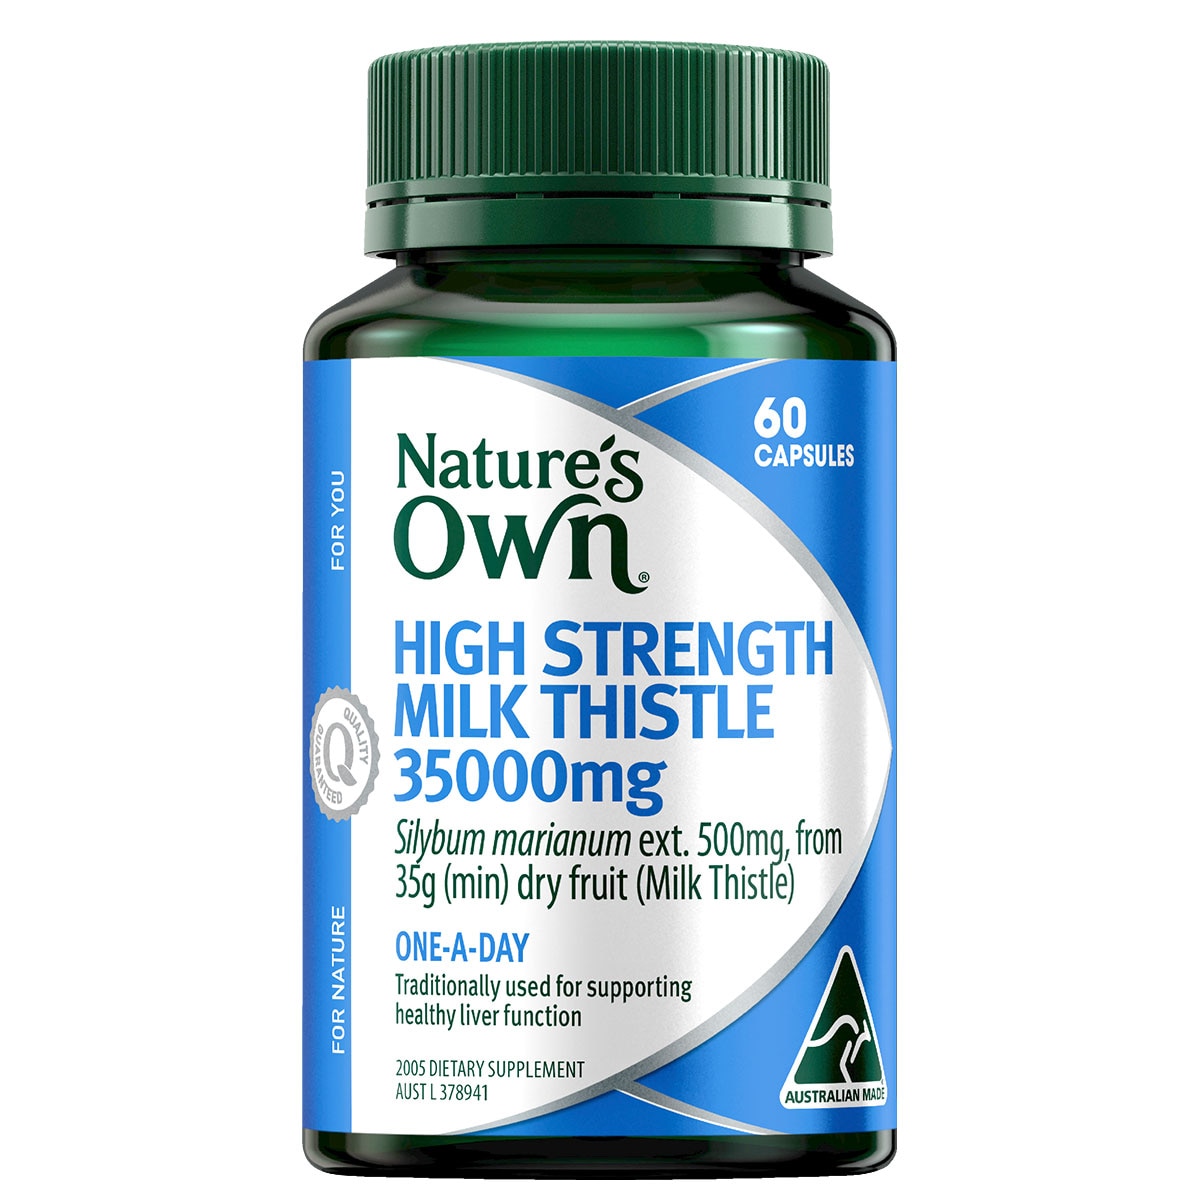 Natures Own High Strength Milk Thistle 35000mg 60 Capsules